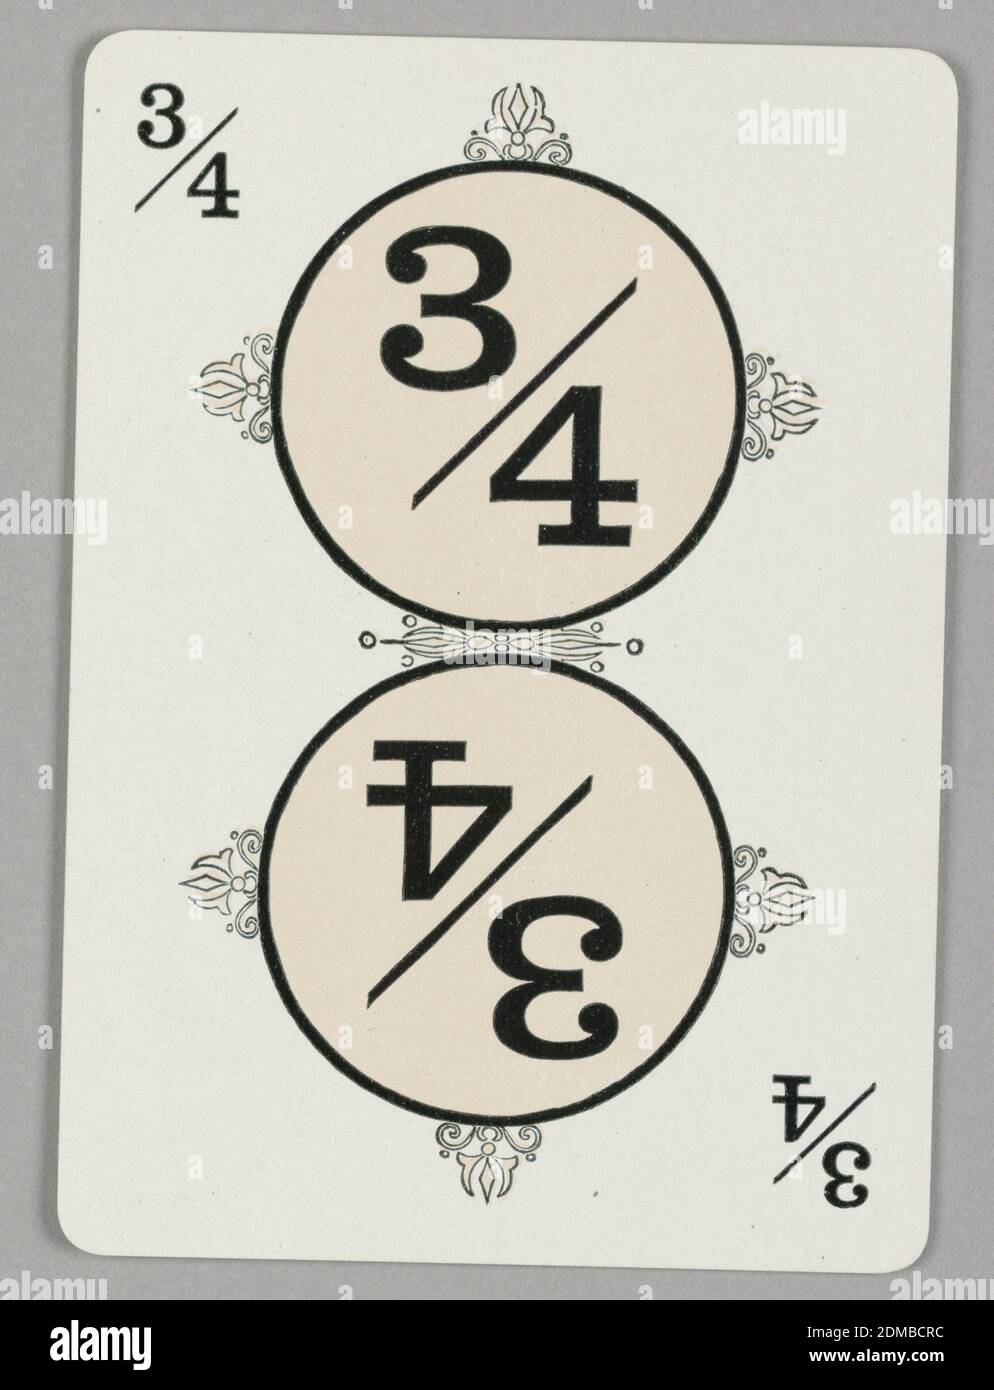 3/4 Fraction, Educational Game, The Cincinnati Game Company, Cincinnati, Ohio, USA, Lithograph on paper, Rectangular format playing card with rounded edges, for use in an educational game on fractions. A symmetrical design, the fraction 3/4 in a pale pink circle at upper center surrounded by decorative motifs at top, bottom, left, and right; the number 3/4 printed in black at upper left. The lower portion of the card is a translated repeat of the design., Europe and USA, 1902–05, toys & games, Playing card, Playing card Stock Photo